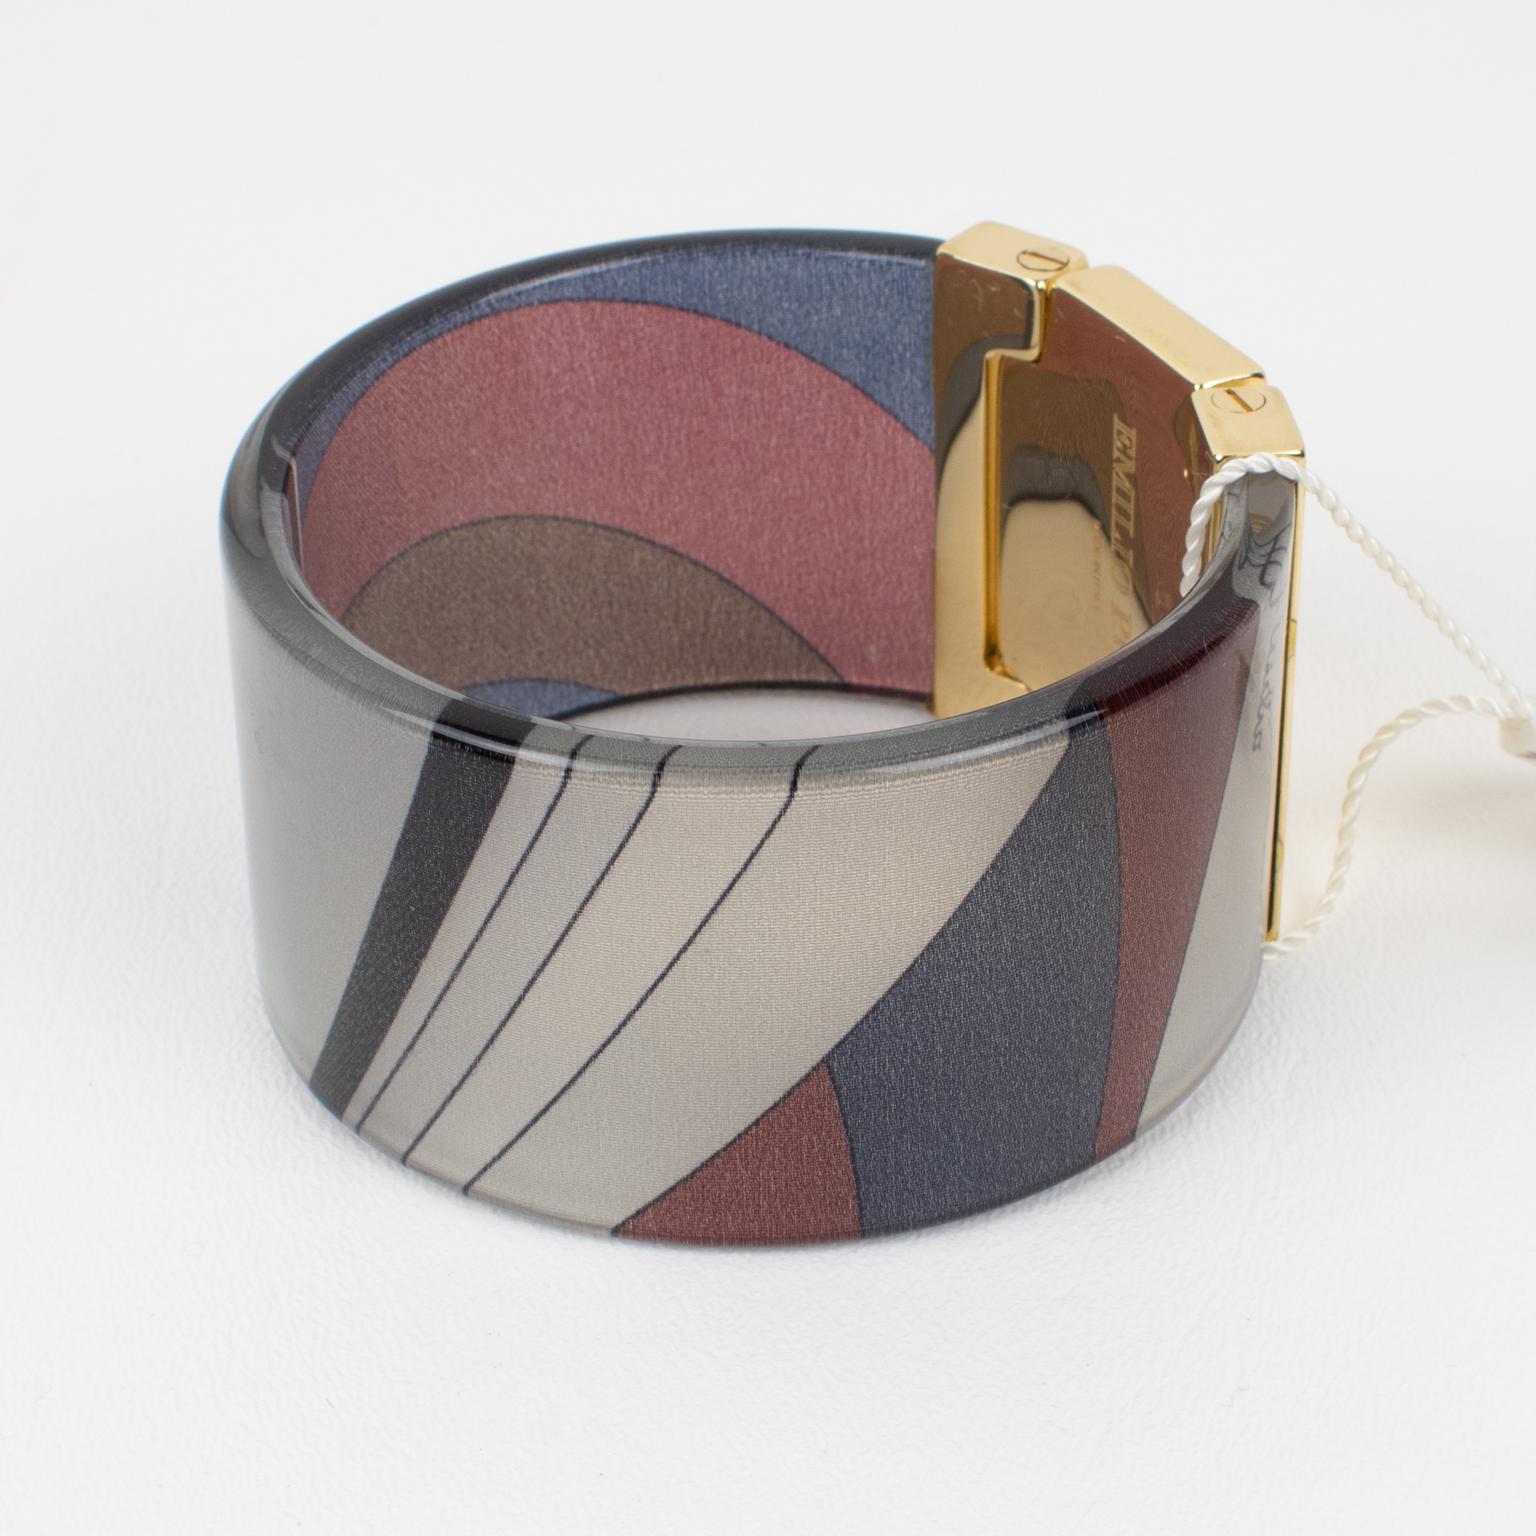 Superb chunky Emilio Pucci gilded metal, acrylic, and silk bracelet bangle. Large bangle shape of a clear acrylic band with multicolor Pucci silk inclusion. The bracelet is ornate with a gilt metal faux hinge topped with a massive rectangular